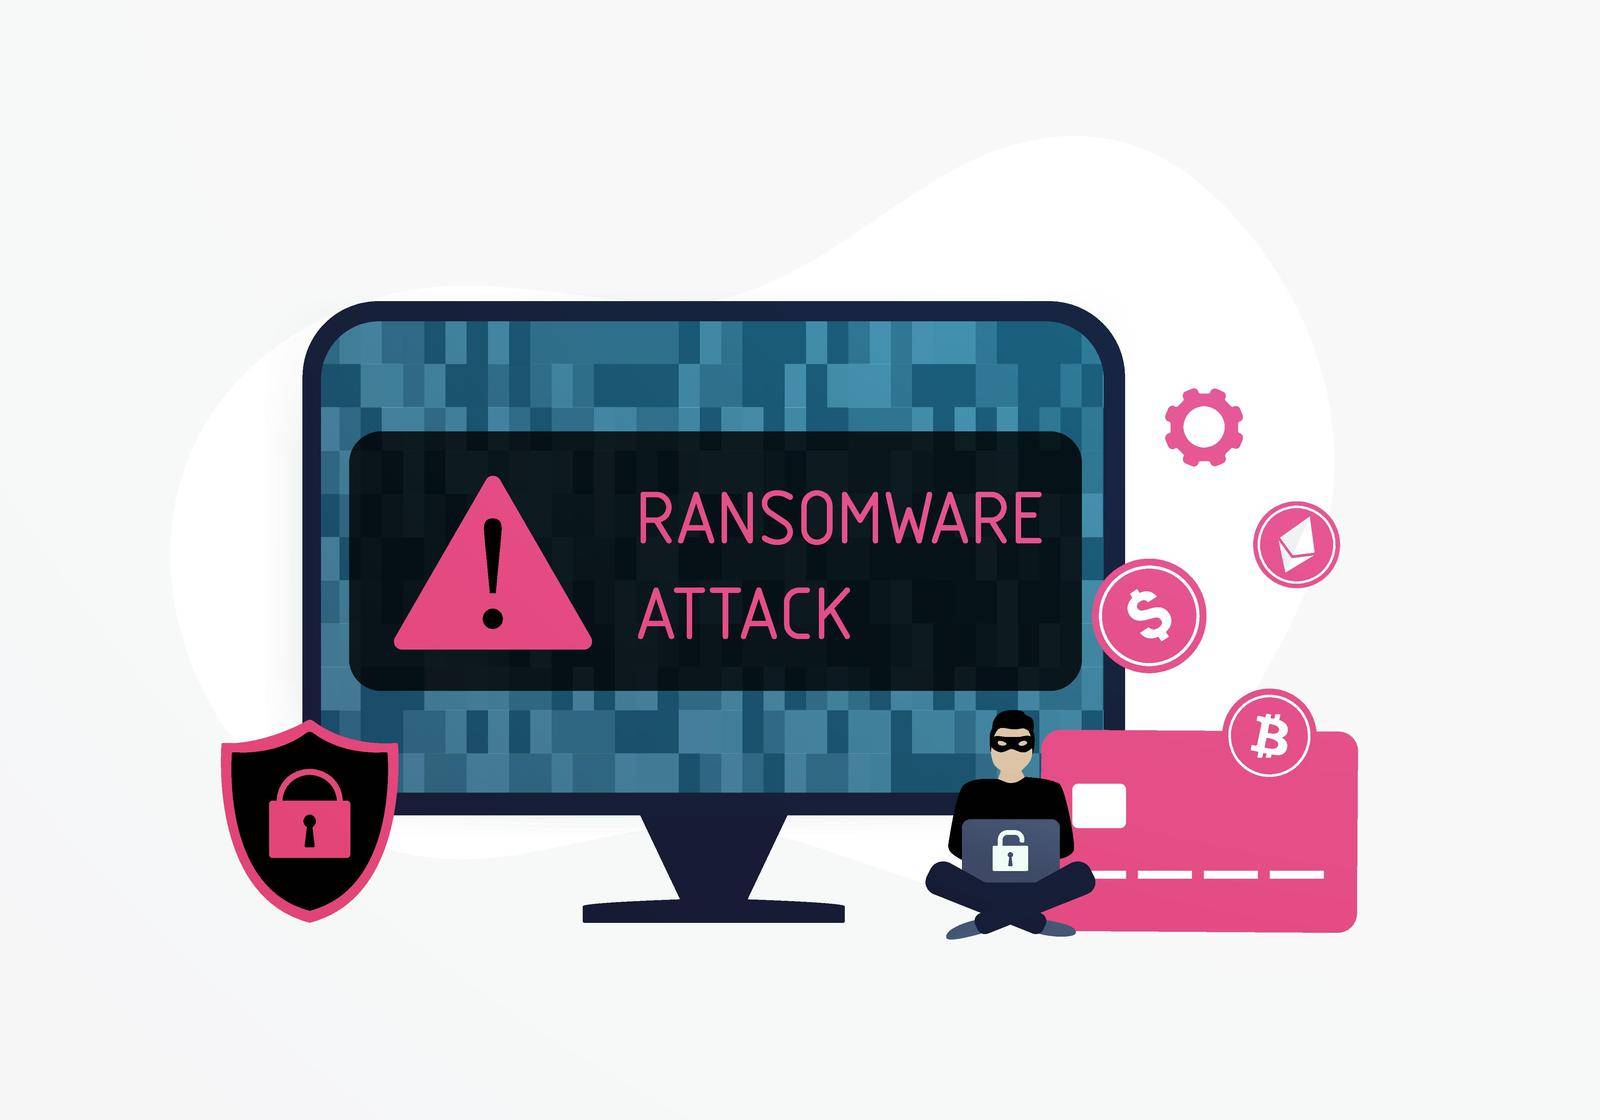 Ransomware is a type of malware that interferes with proper functioning of a computer and requires money to restore normal access to information. Hacker Cyber Attack, Desktop PC with alert message